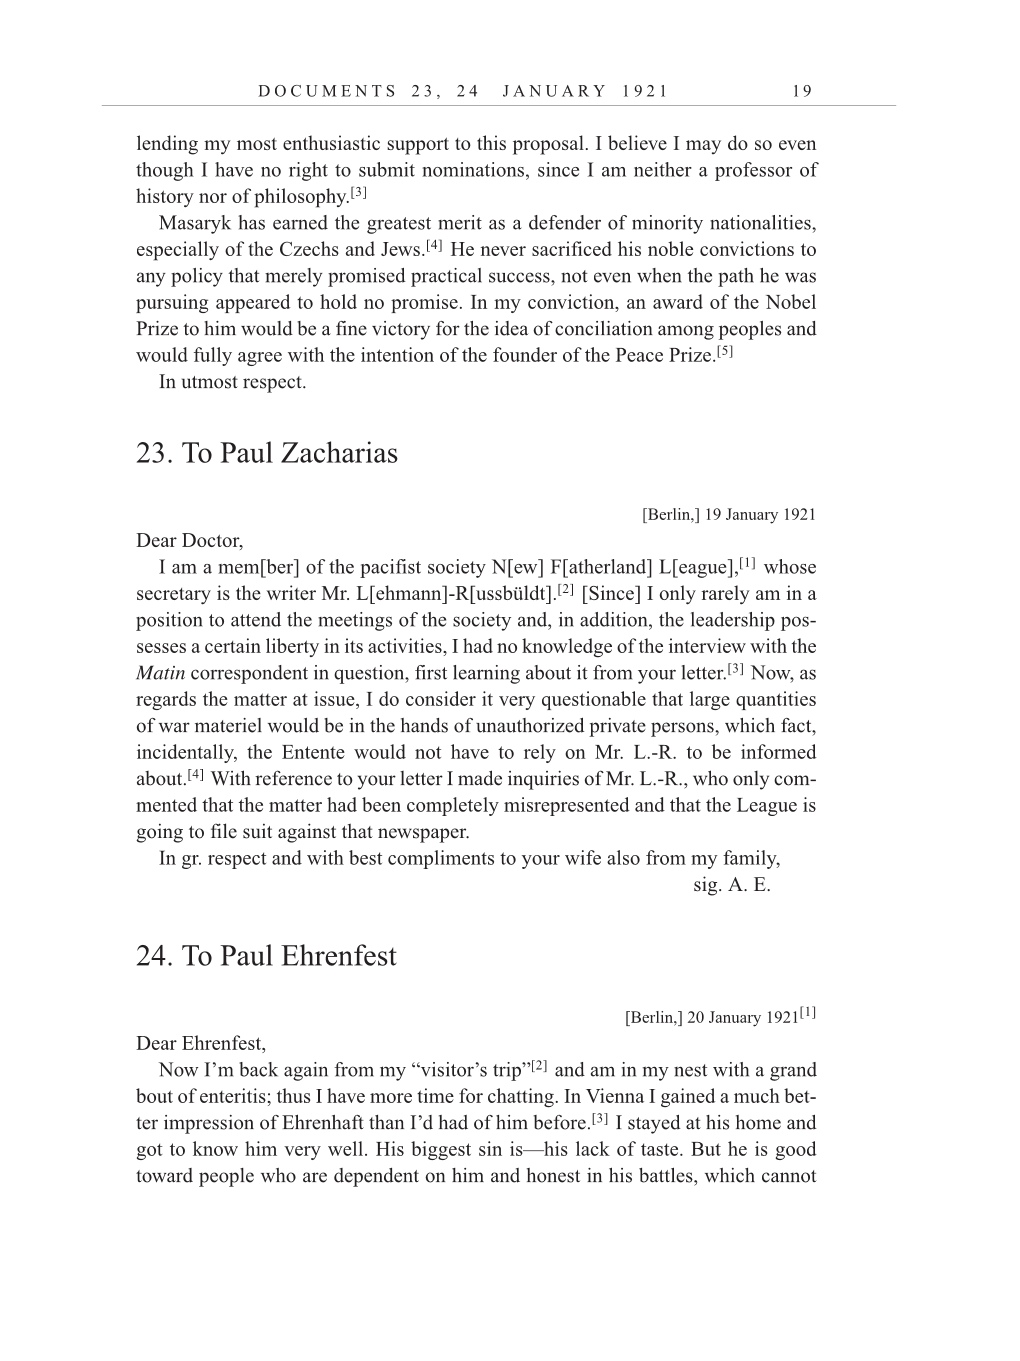 Volume 12: The Berlin Years: Correspondence, January-December 1921 (English translation supplement) page 19